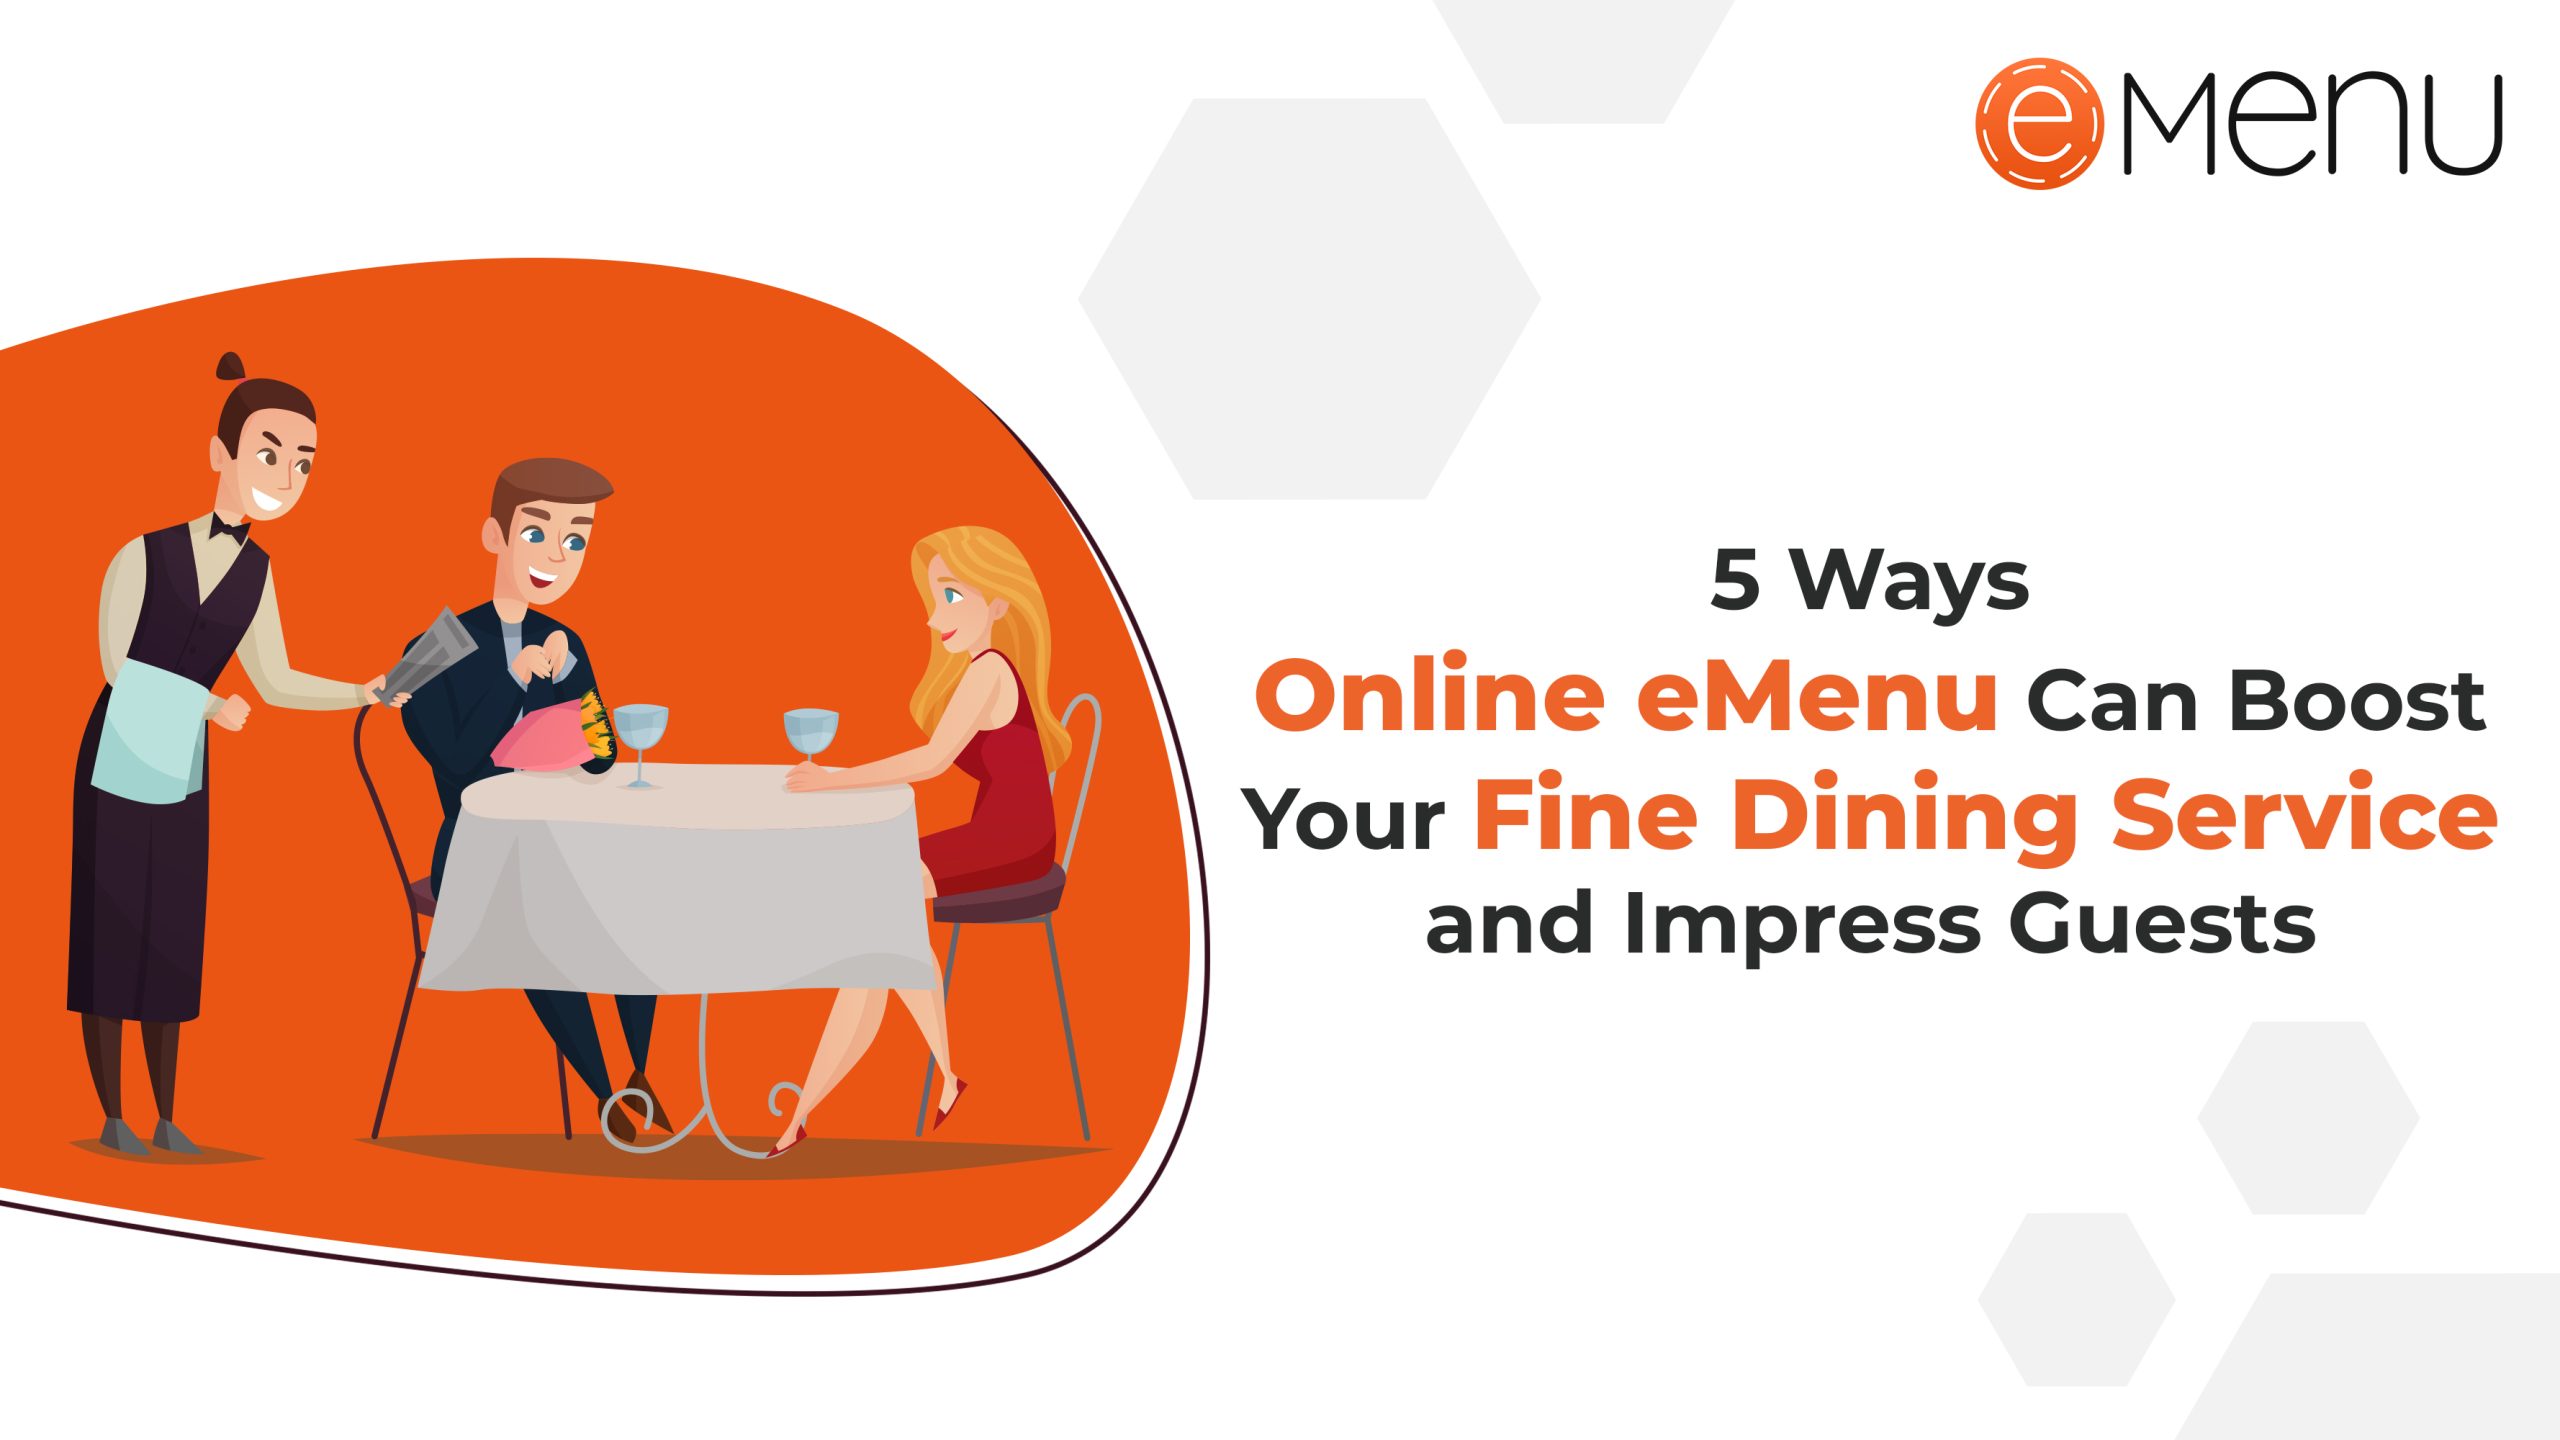 5 Ways Online eMenu Can Boost Your Fine Dining Service